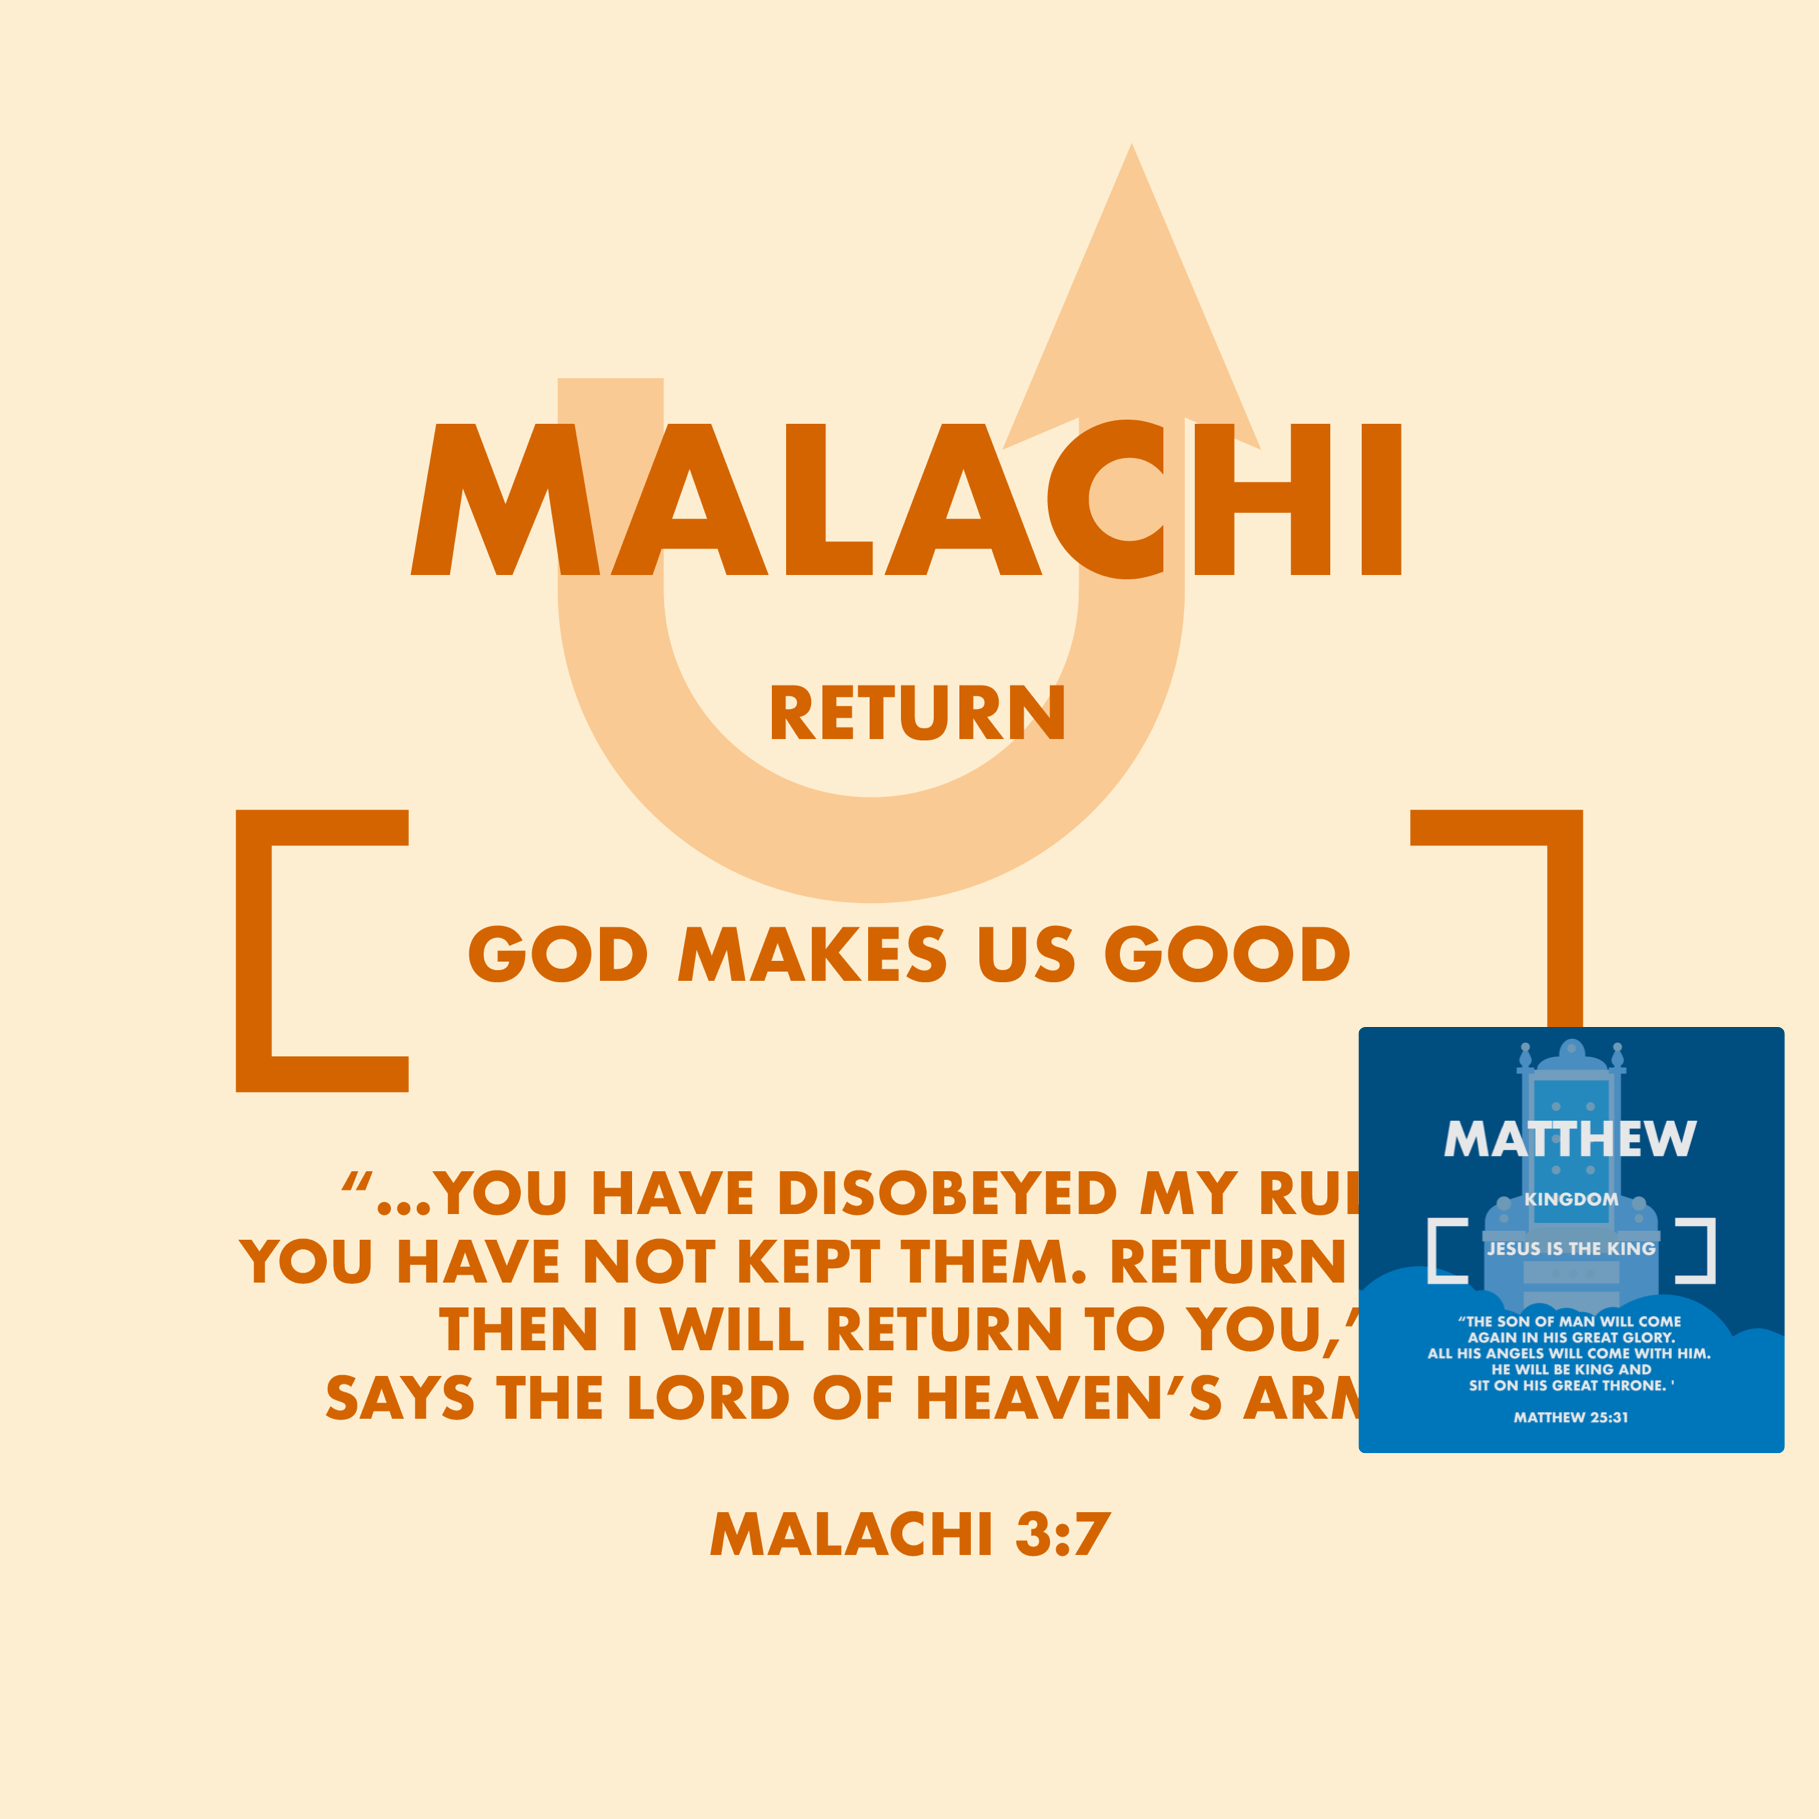 Books of the Bible_posters_37 Malachi.png